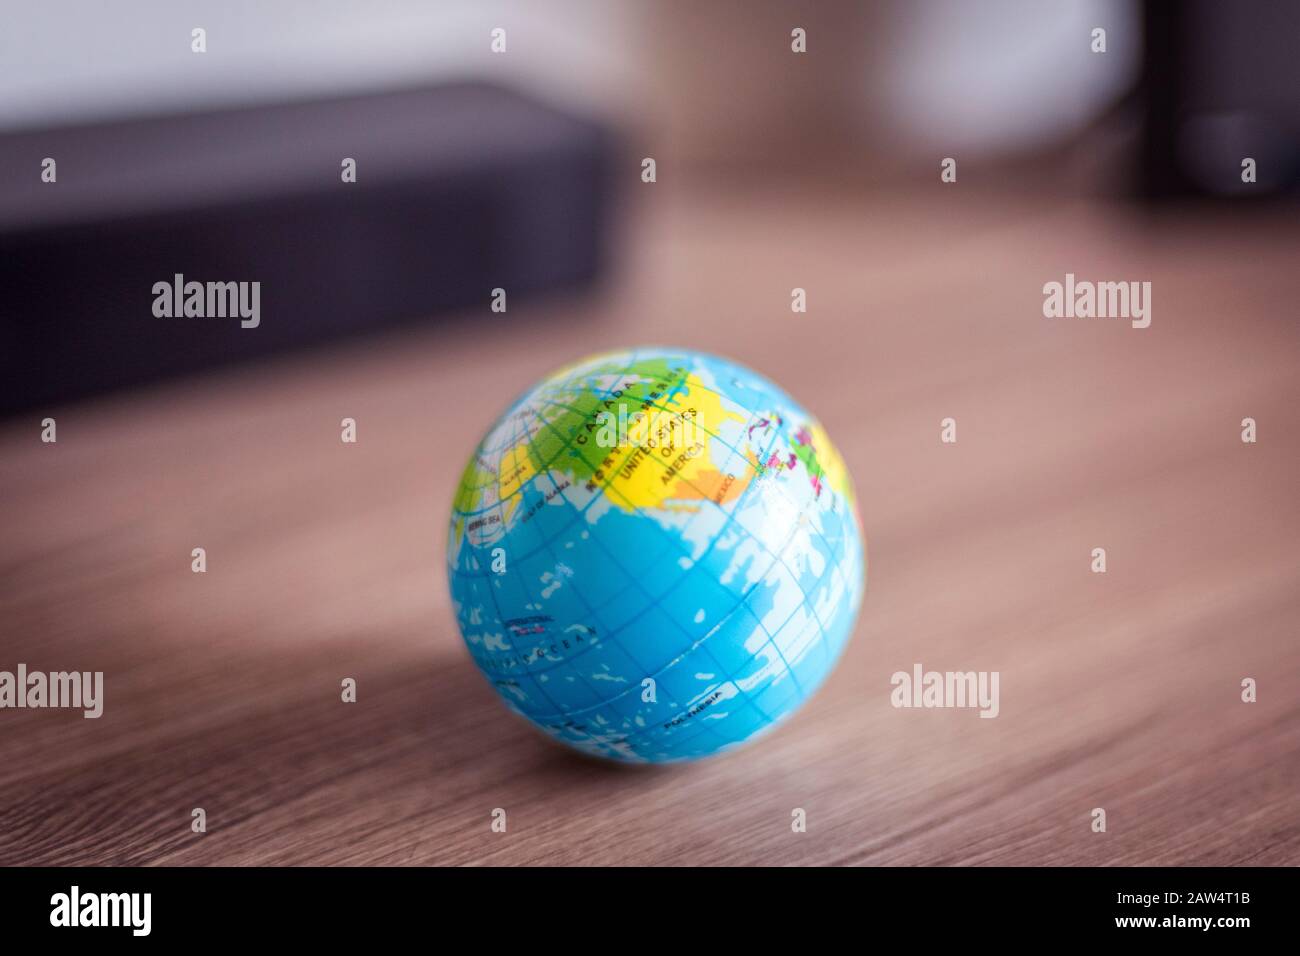 The USA on a small globe on a wooden surface Stock Photo